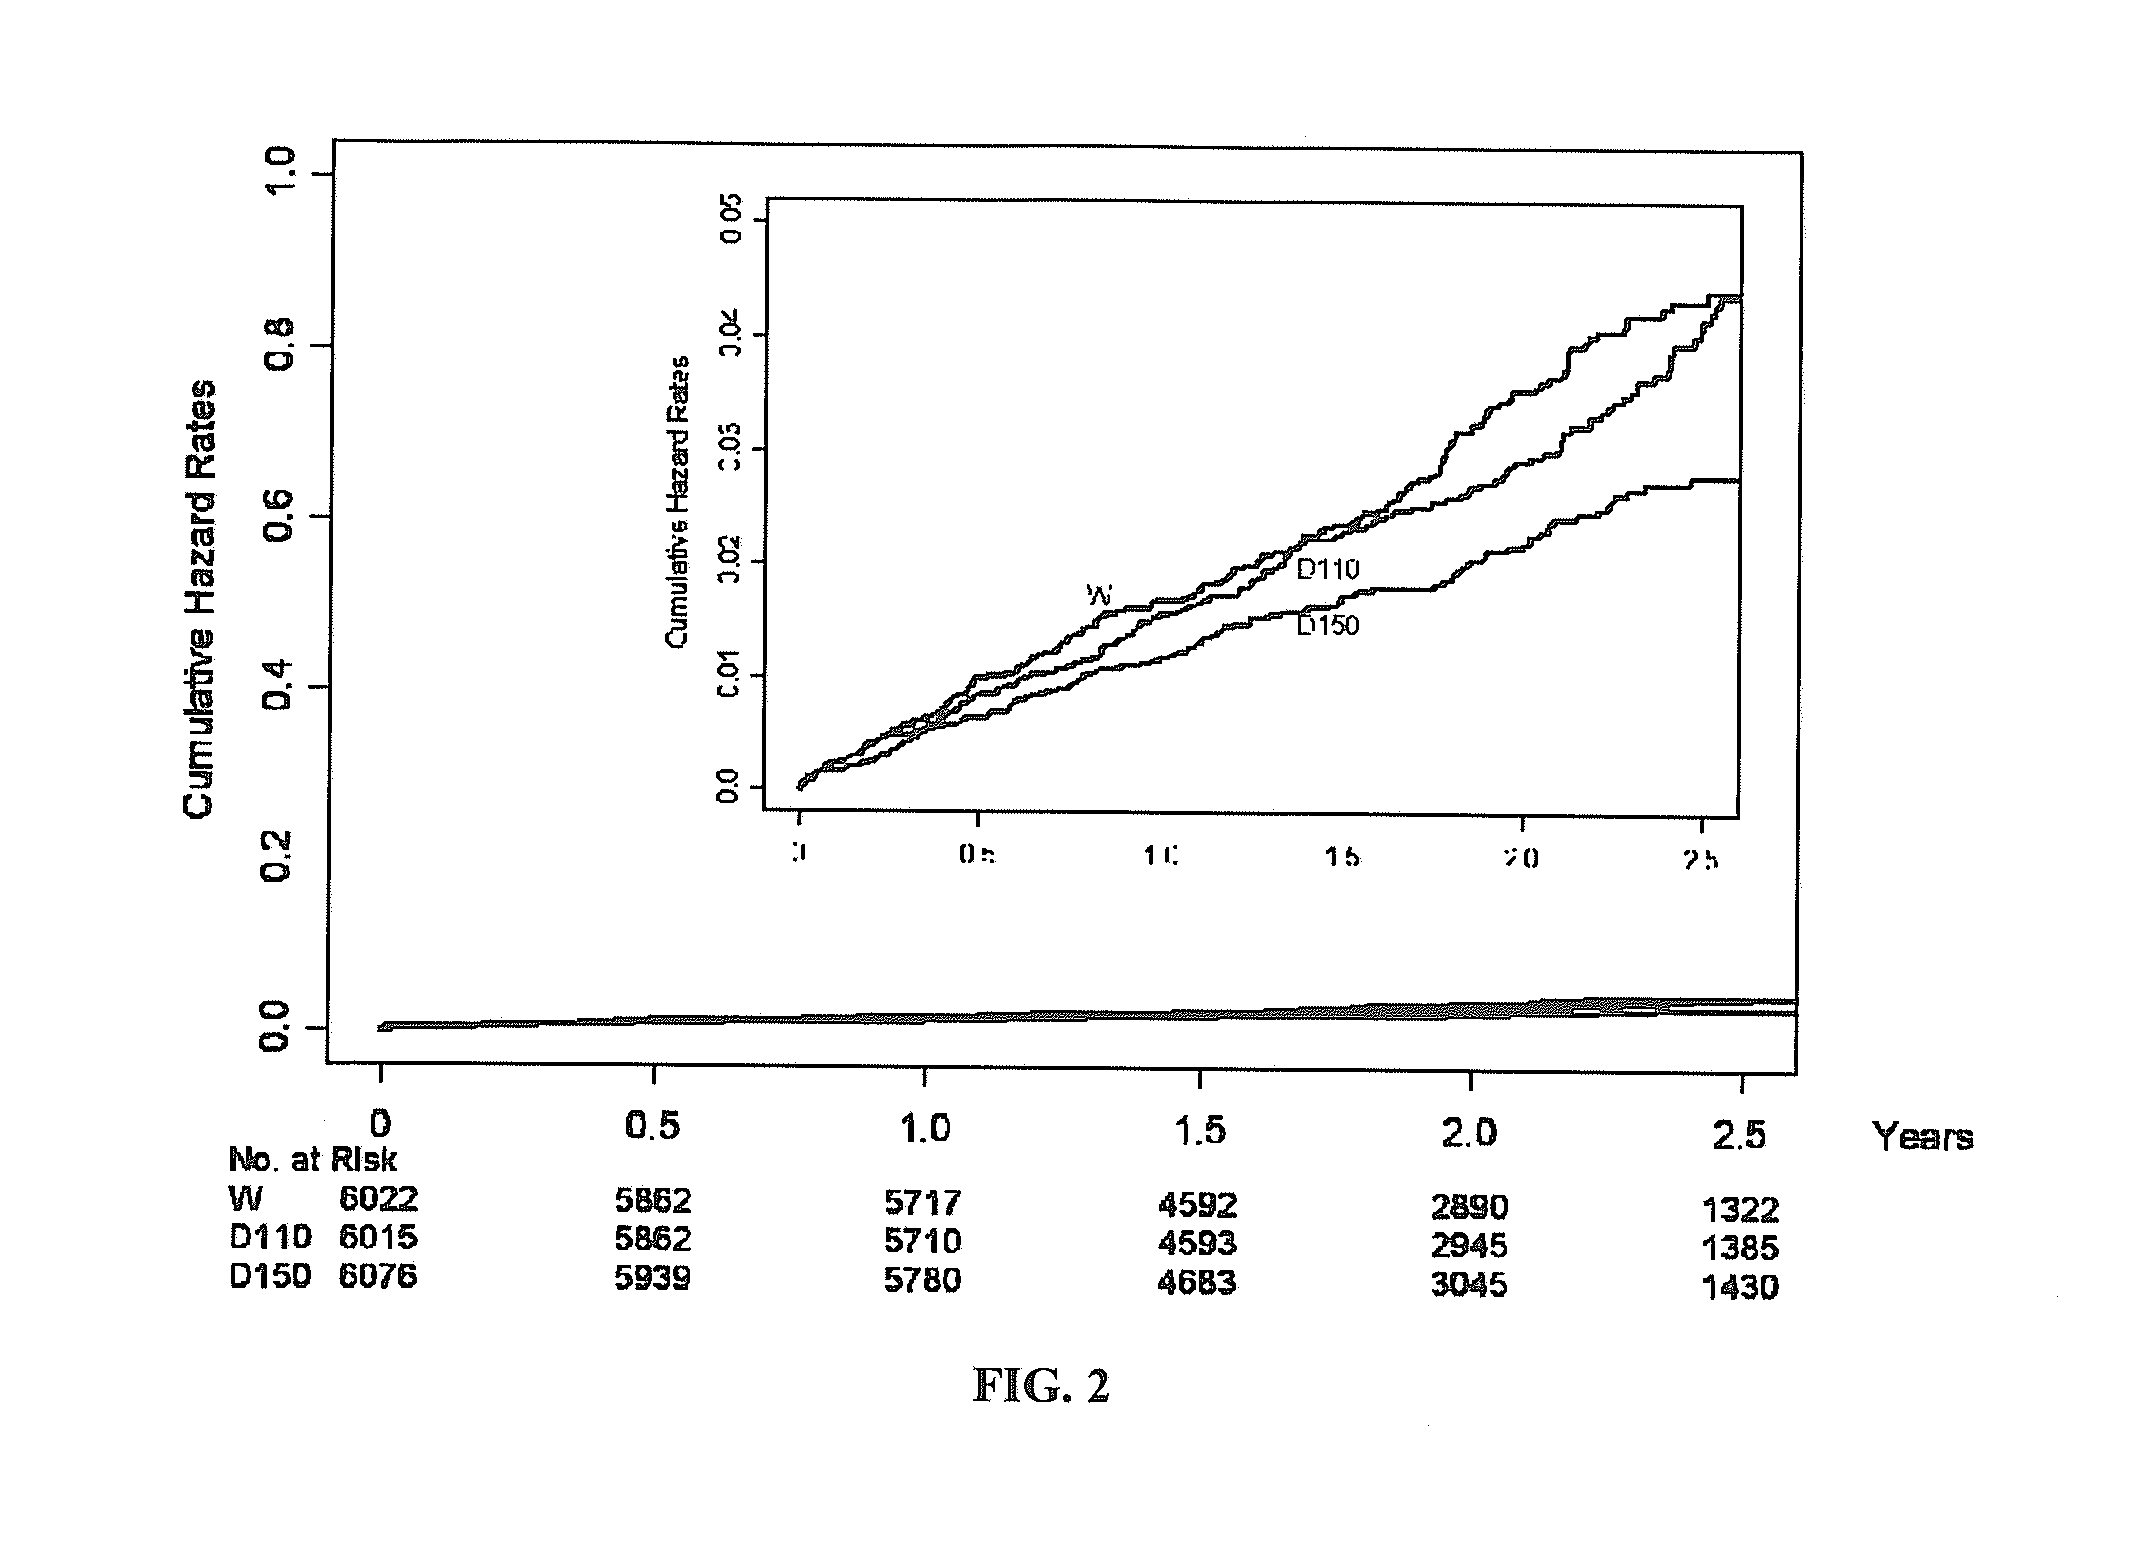 Method for treating or preventing thrombosis using dabigatran etexilate or a salt thereof with improved safety profile over conventional warfarin therapy